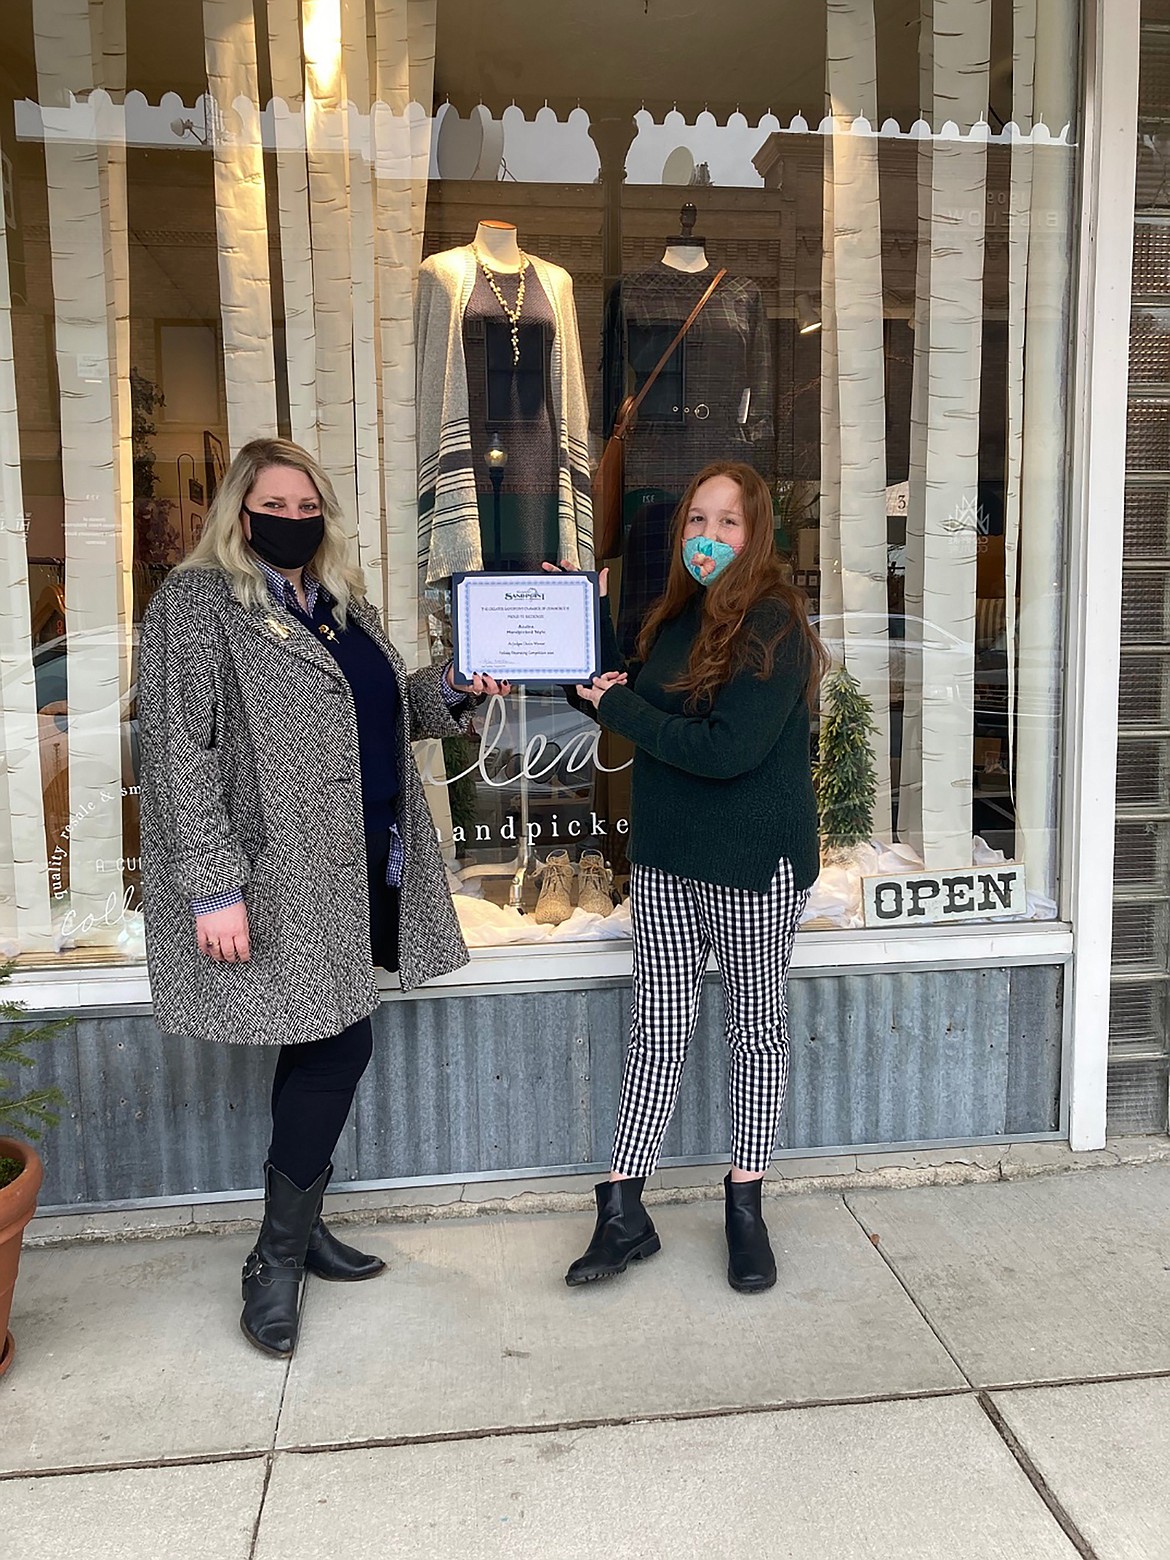 Ricci Witte of the Greater Sandpoint Chamber of Commerce presents Azalea with their 2020 Judges Choice certificate.